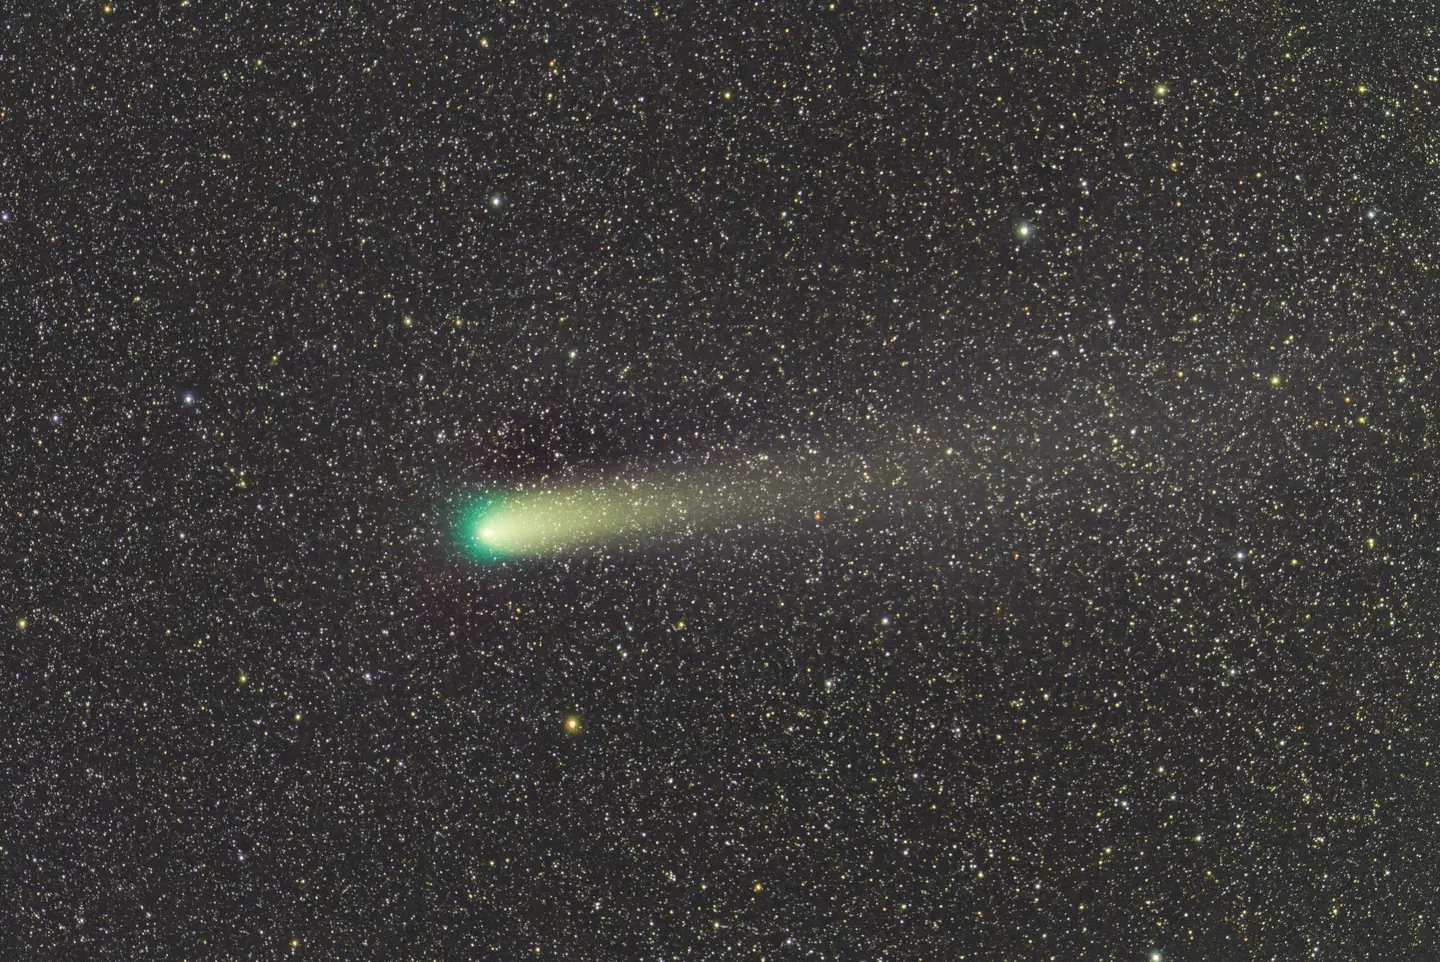 The comet 21P/Giacobini-Zinner, where the Draconid meteor shower originates from.